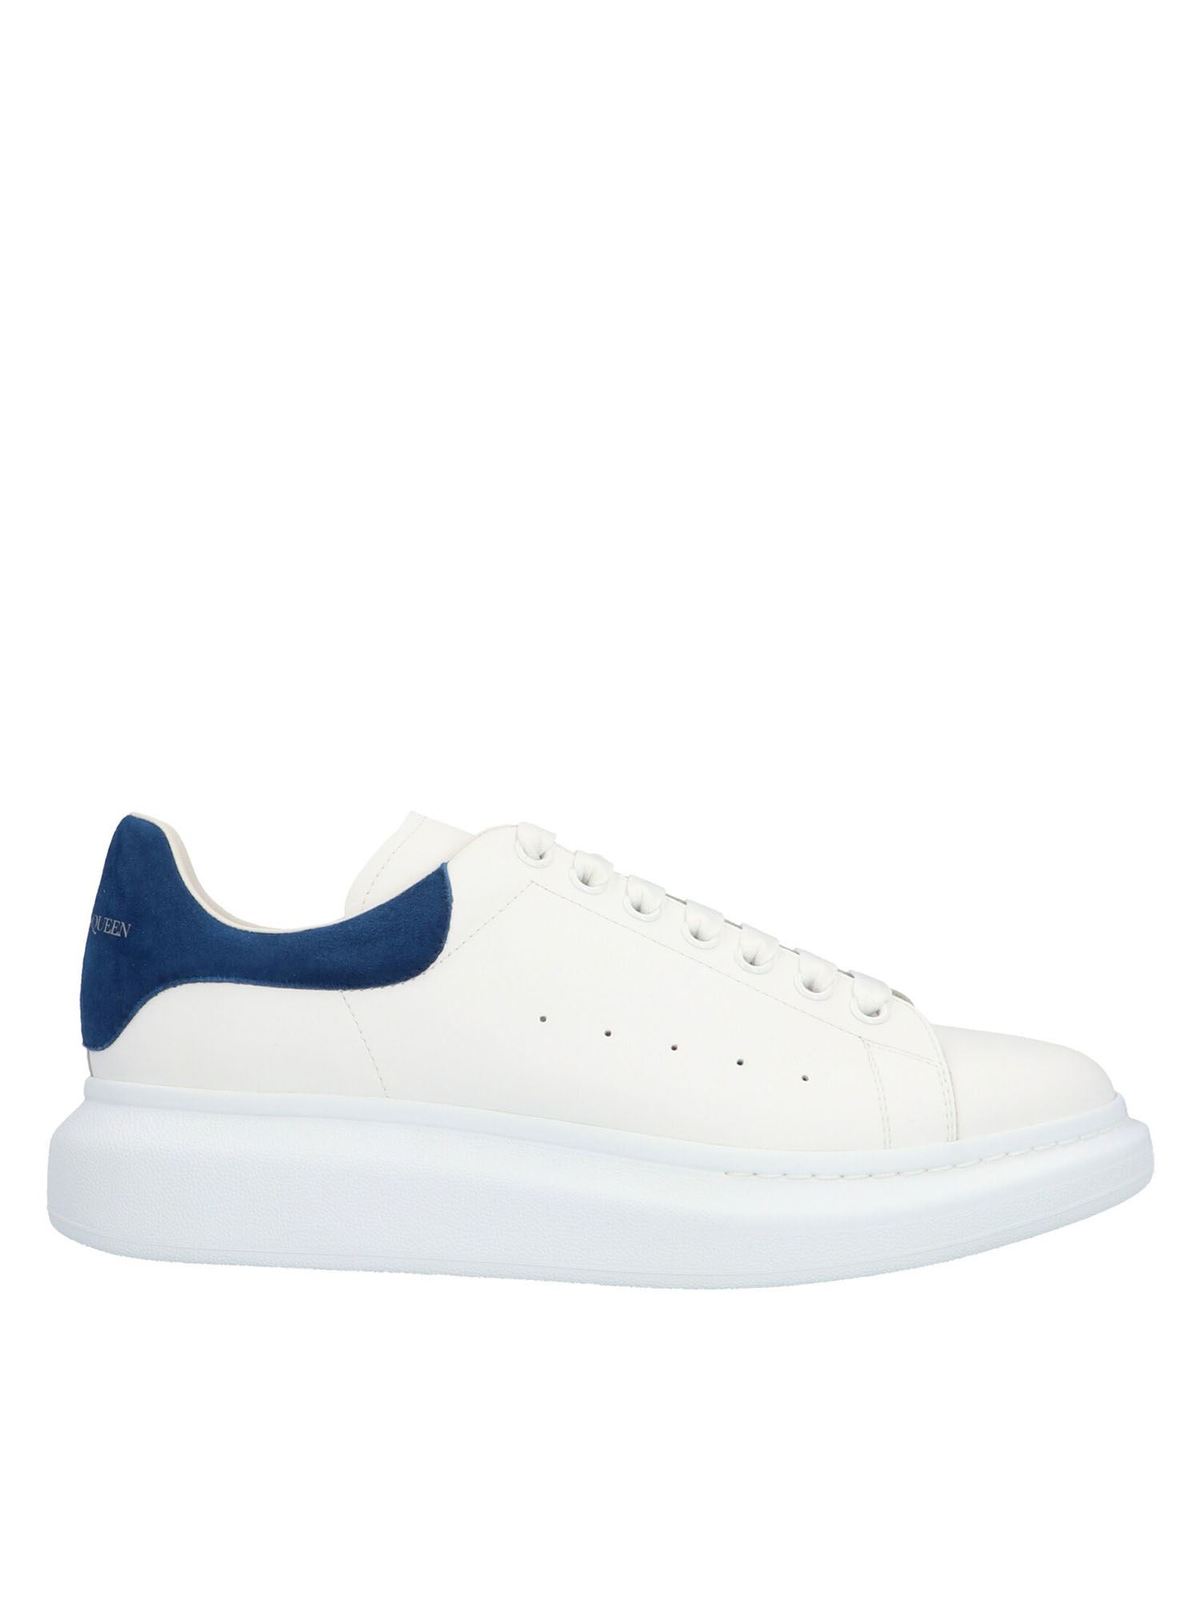 Alexander Mcqueen Oversize Trainers In White And Blue In Blanco